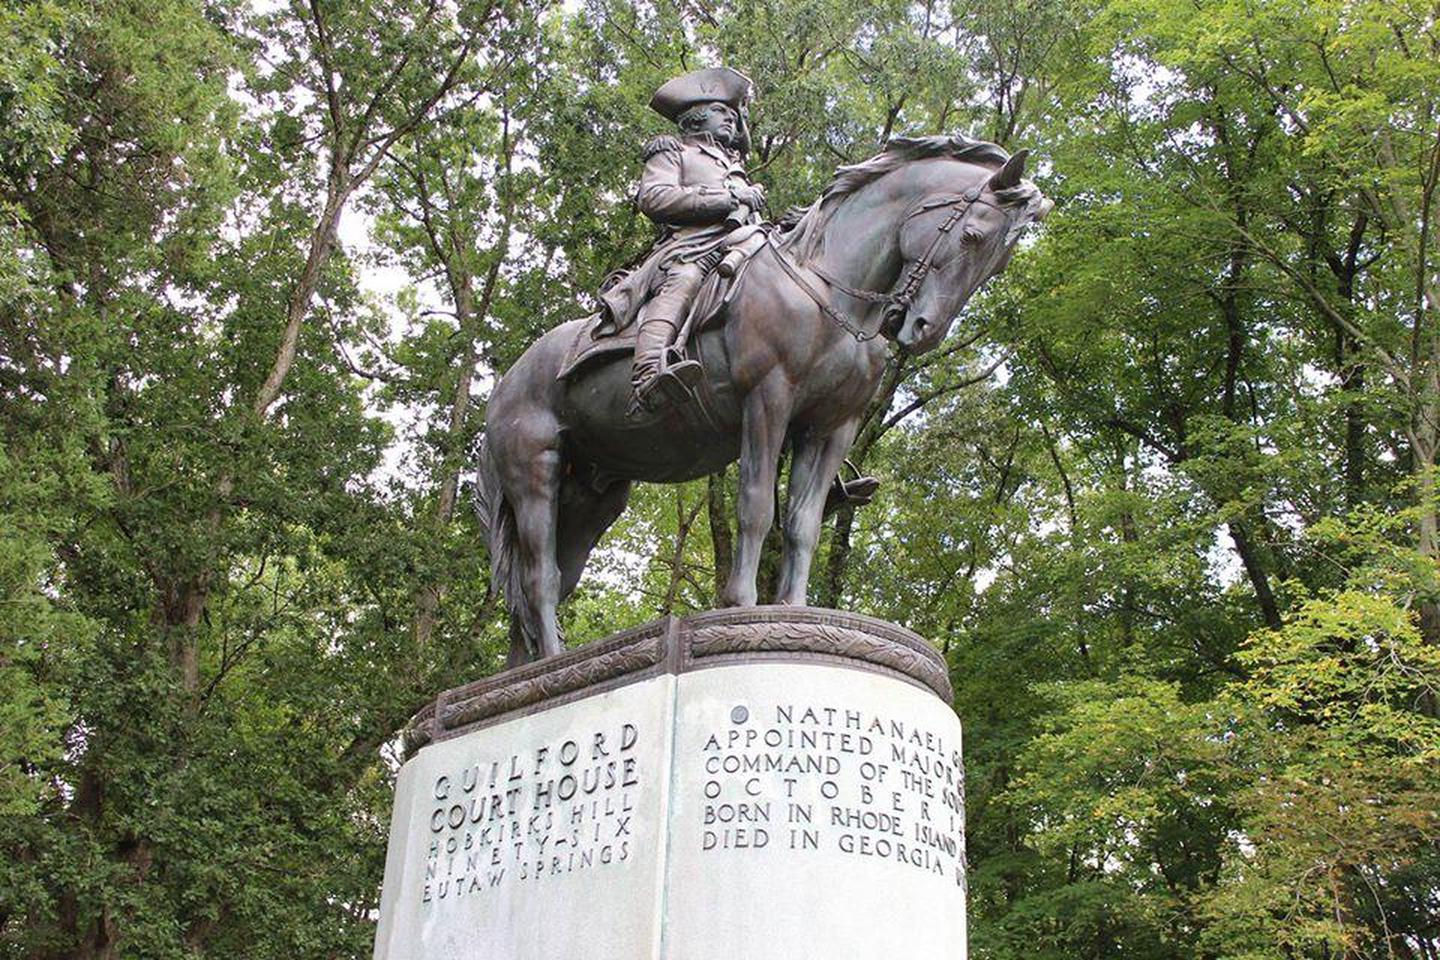 General Nathanael Greene MonumentThe General Greene Monument is a focal point of commemoration on the battlefield